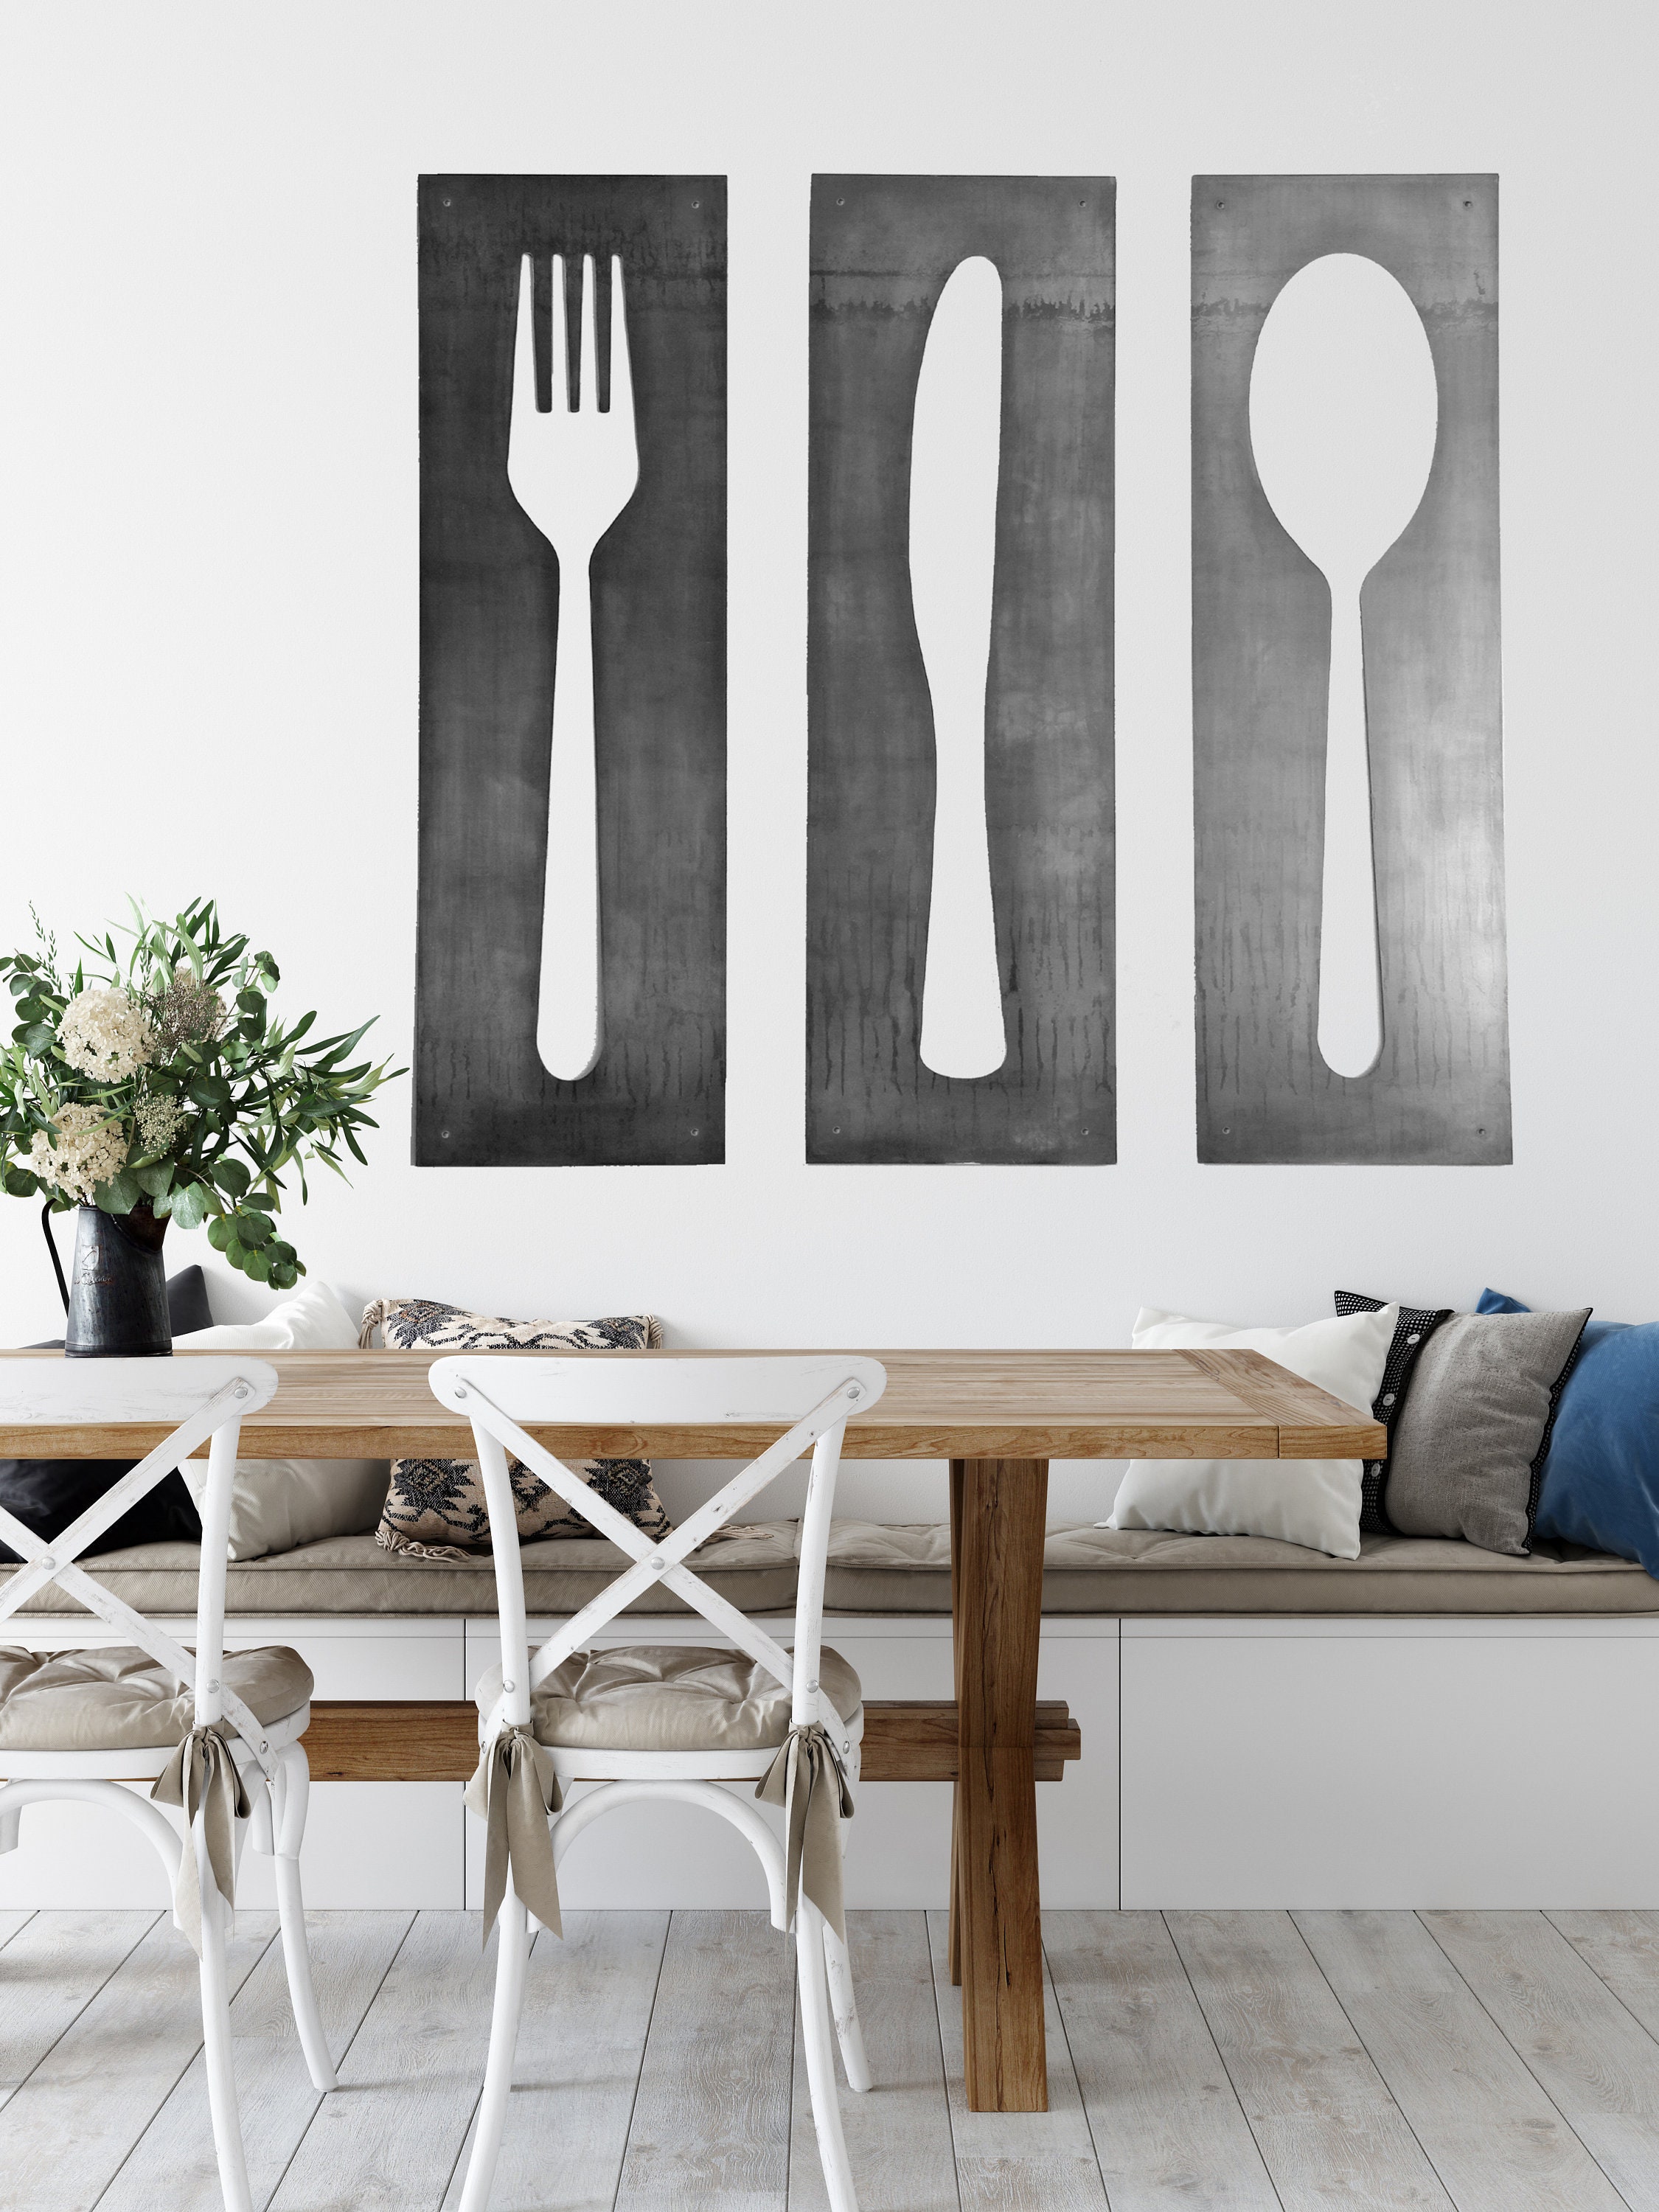 3 Pcs Kitchen Hanging Wall Decoration with Flower Wooden Eat Set Decor Fork and Spoon Wall Decor Rustic Kitchen Wooden Wall Art Sign Cute Kitchen